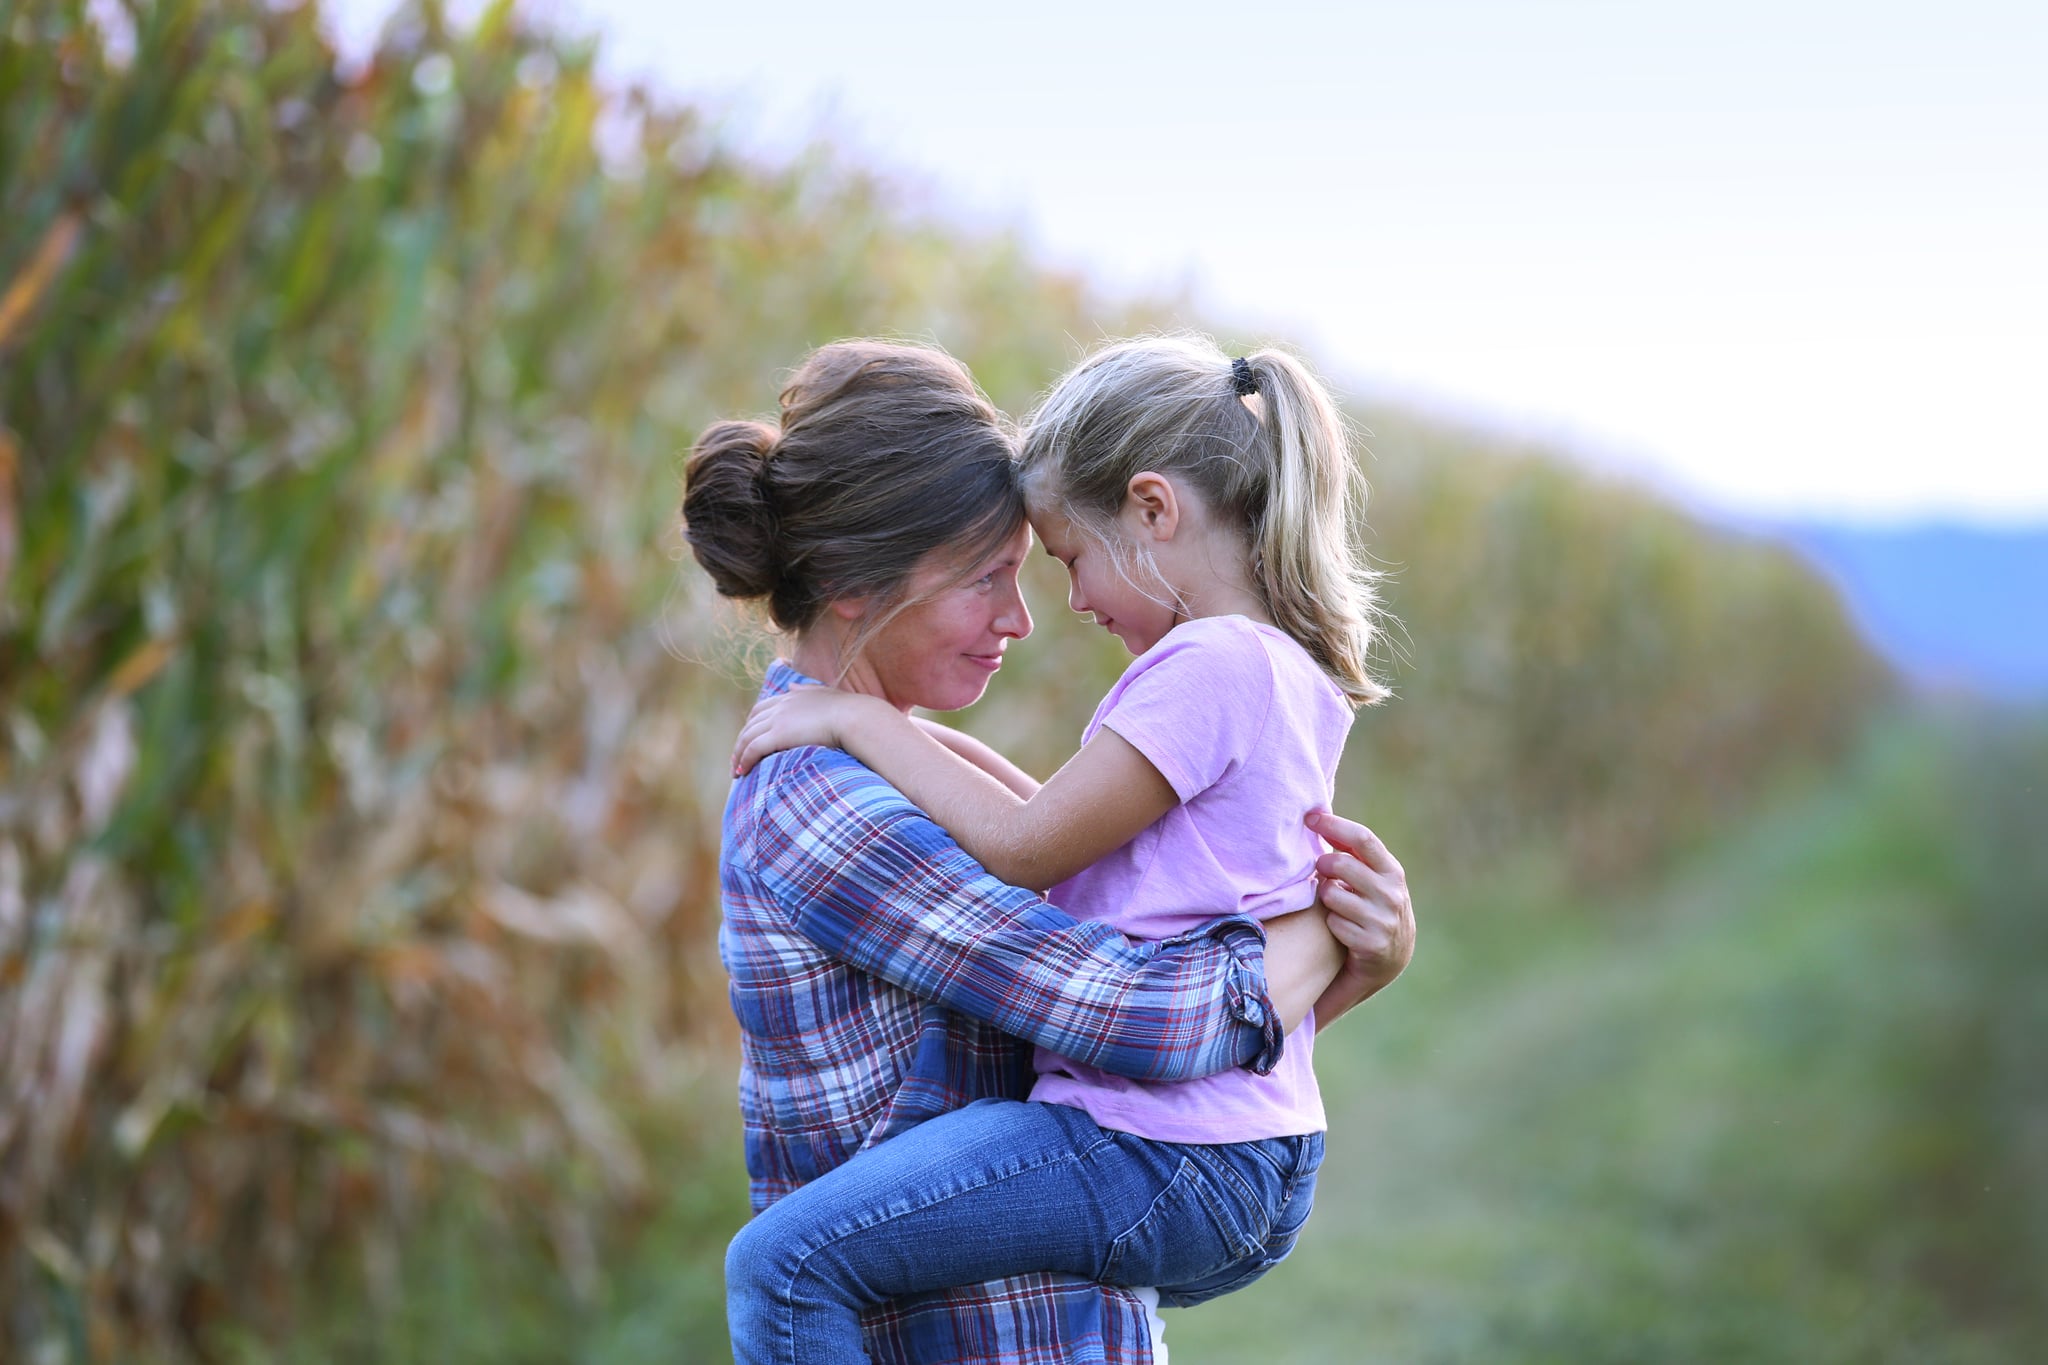 An Iowa farm mother hugs her young daughter while standing next to a field ...